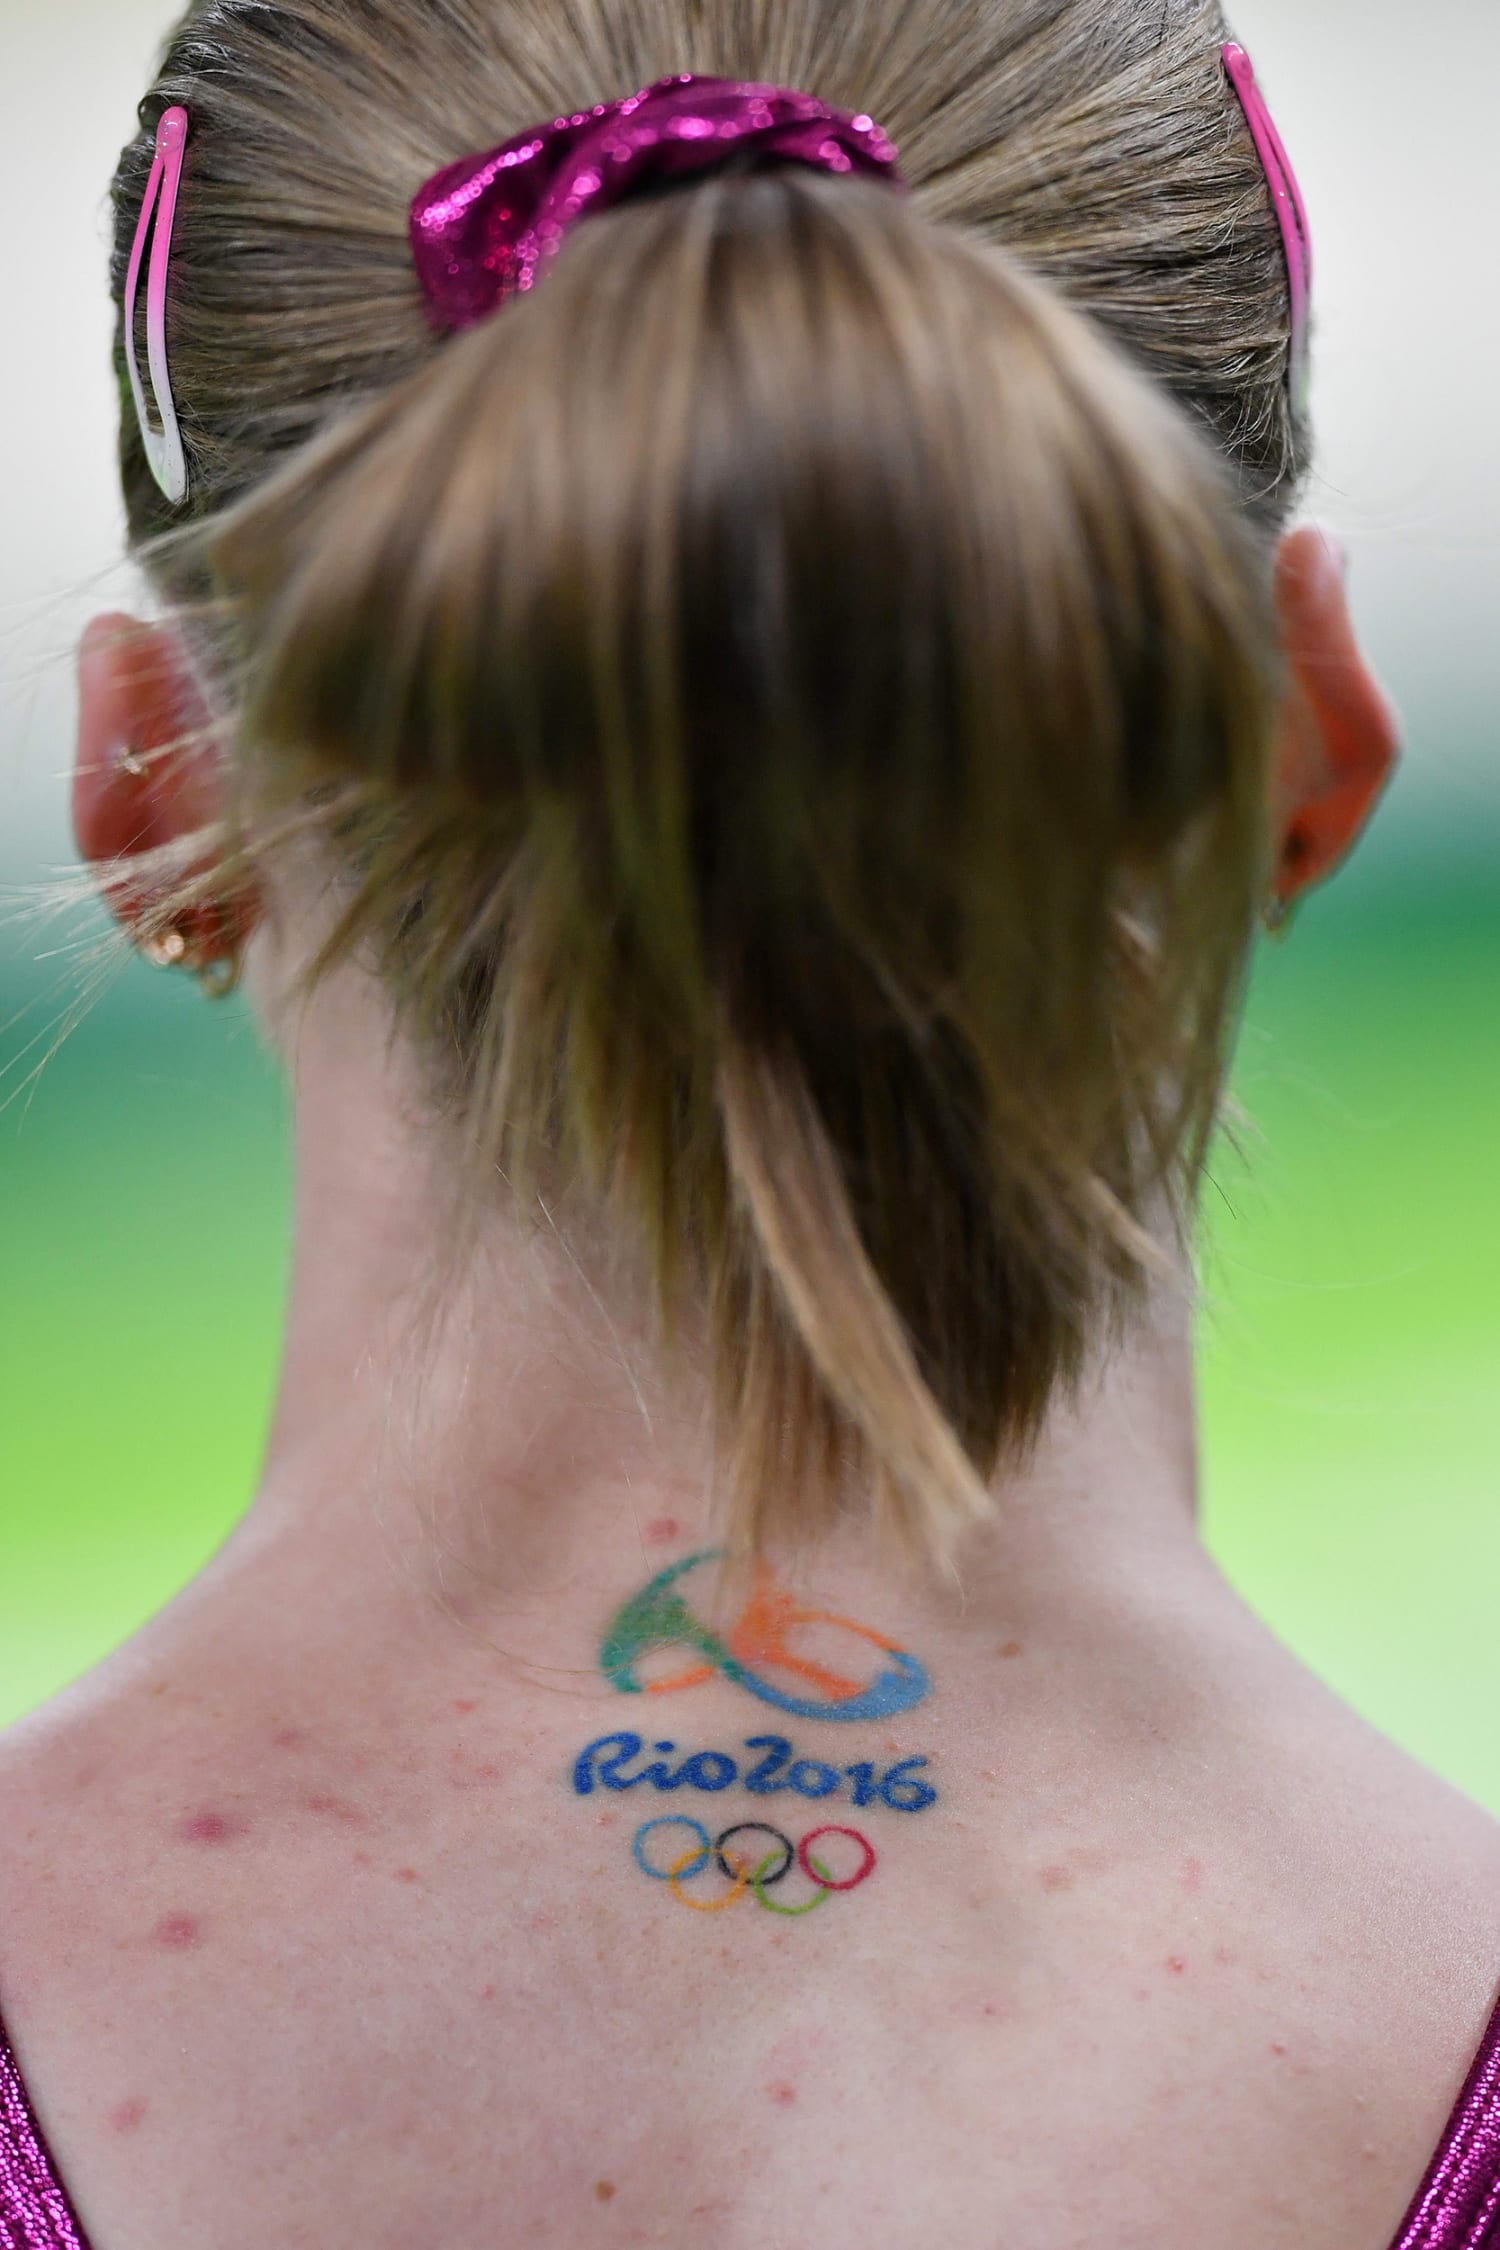 Champs sport striking tattoos at the Tokyo Olympics  Times of India